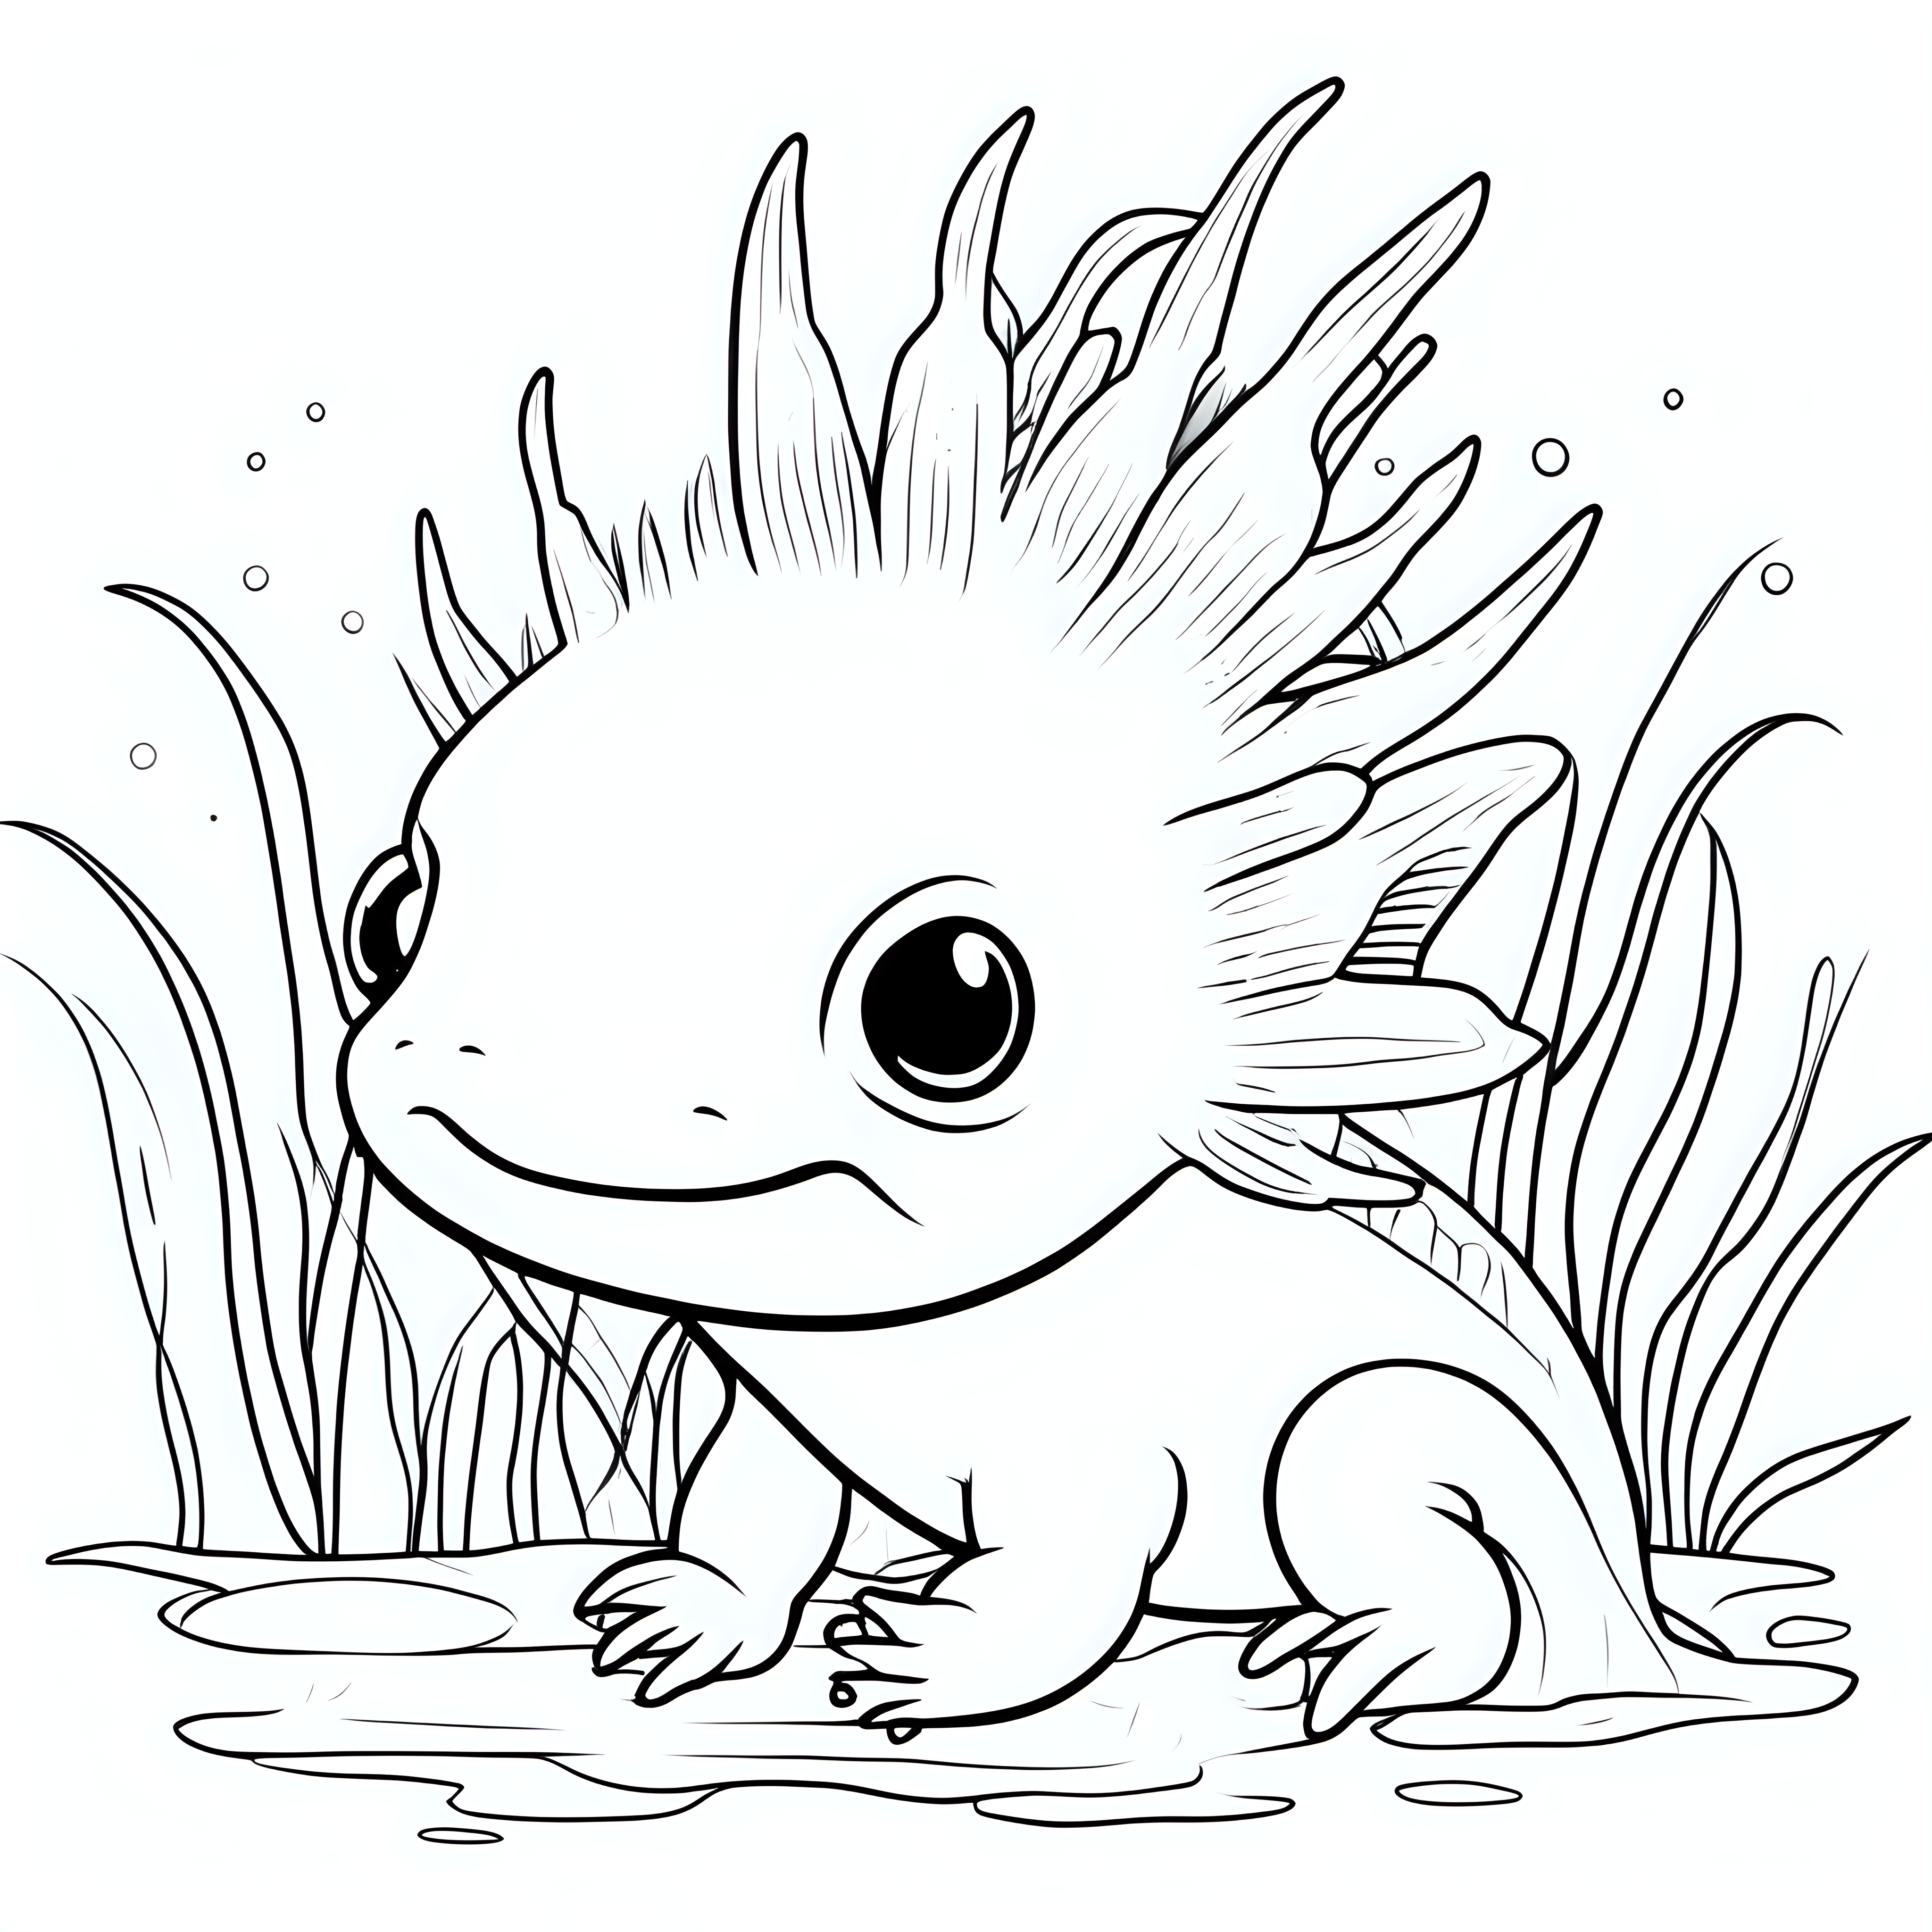 draw a cute Axolotl with only the outline  for a coloring book